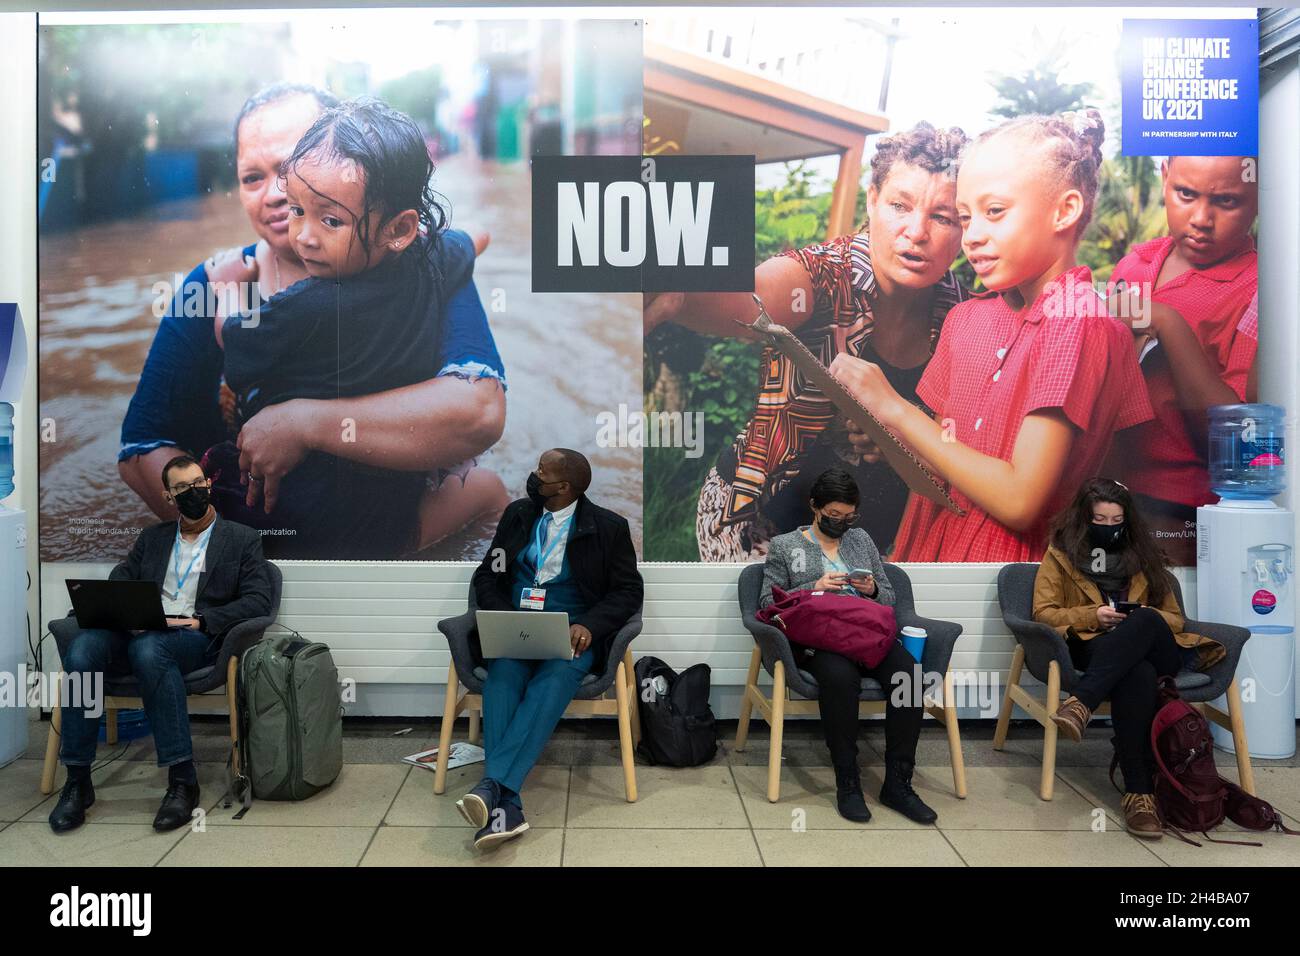 Glasgow, Scotland, UK. 1st November 2021. Images from Monday at the UN climate change conference in Glasgow. Pic; Delegates sit in front of poster at COP26 venue.  Iain Masterton/Alamy Live News. Stock Photo